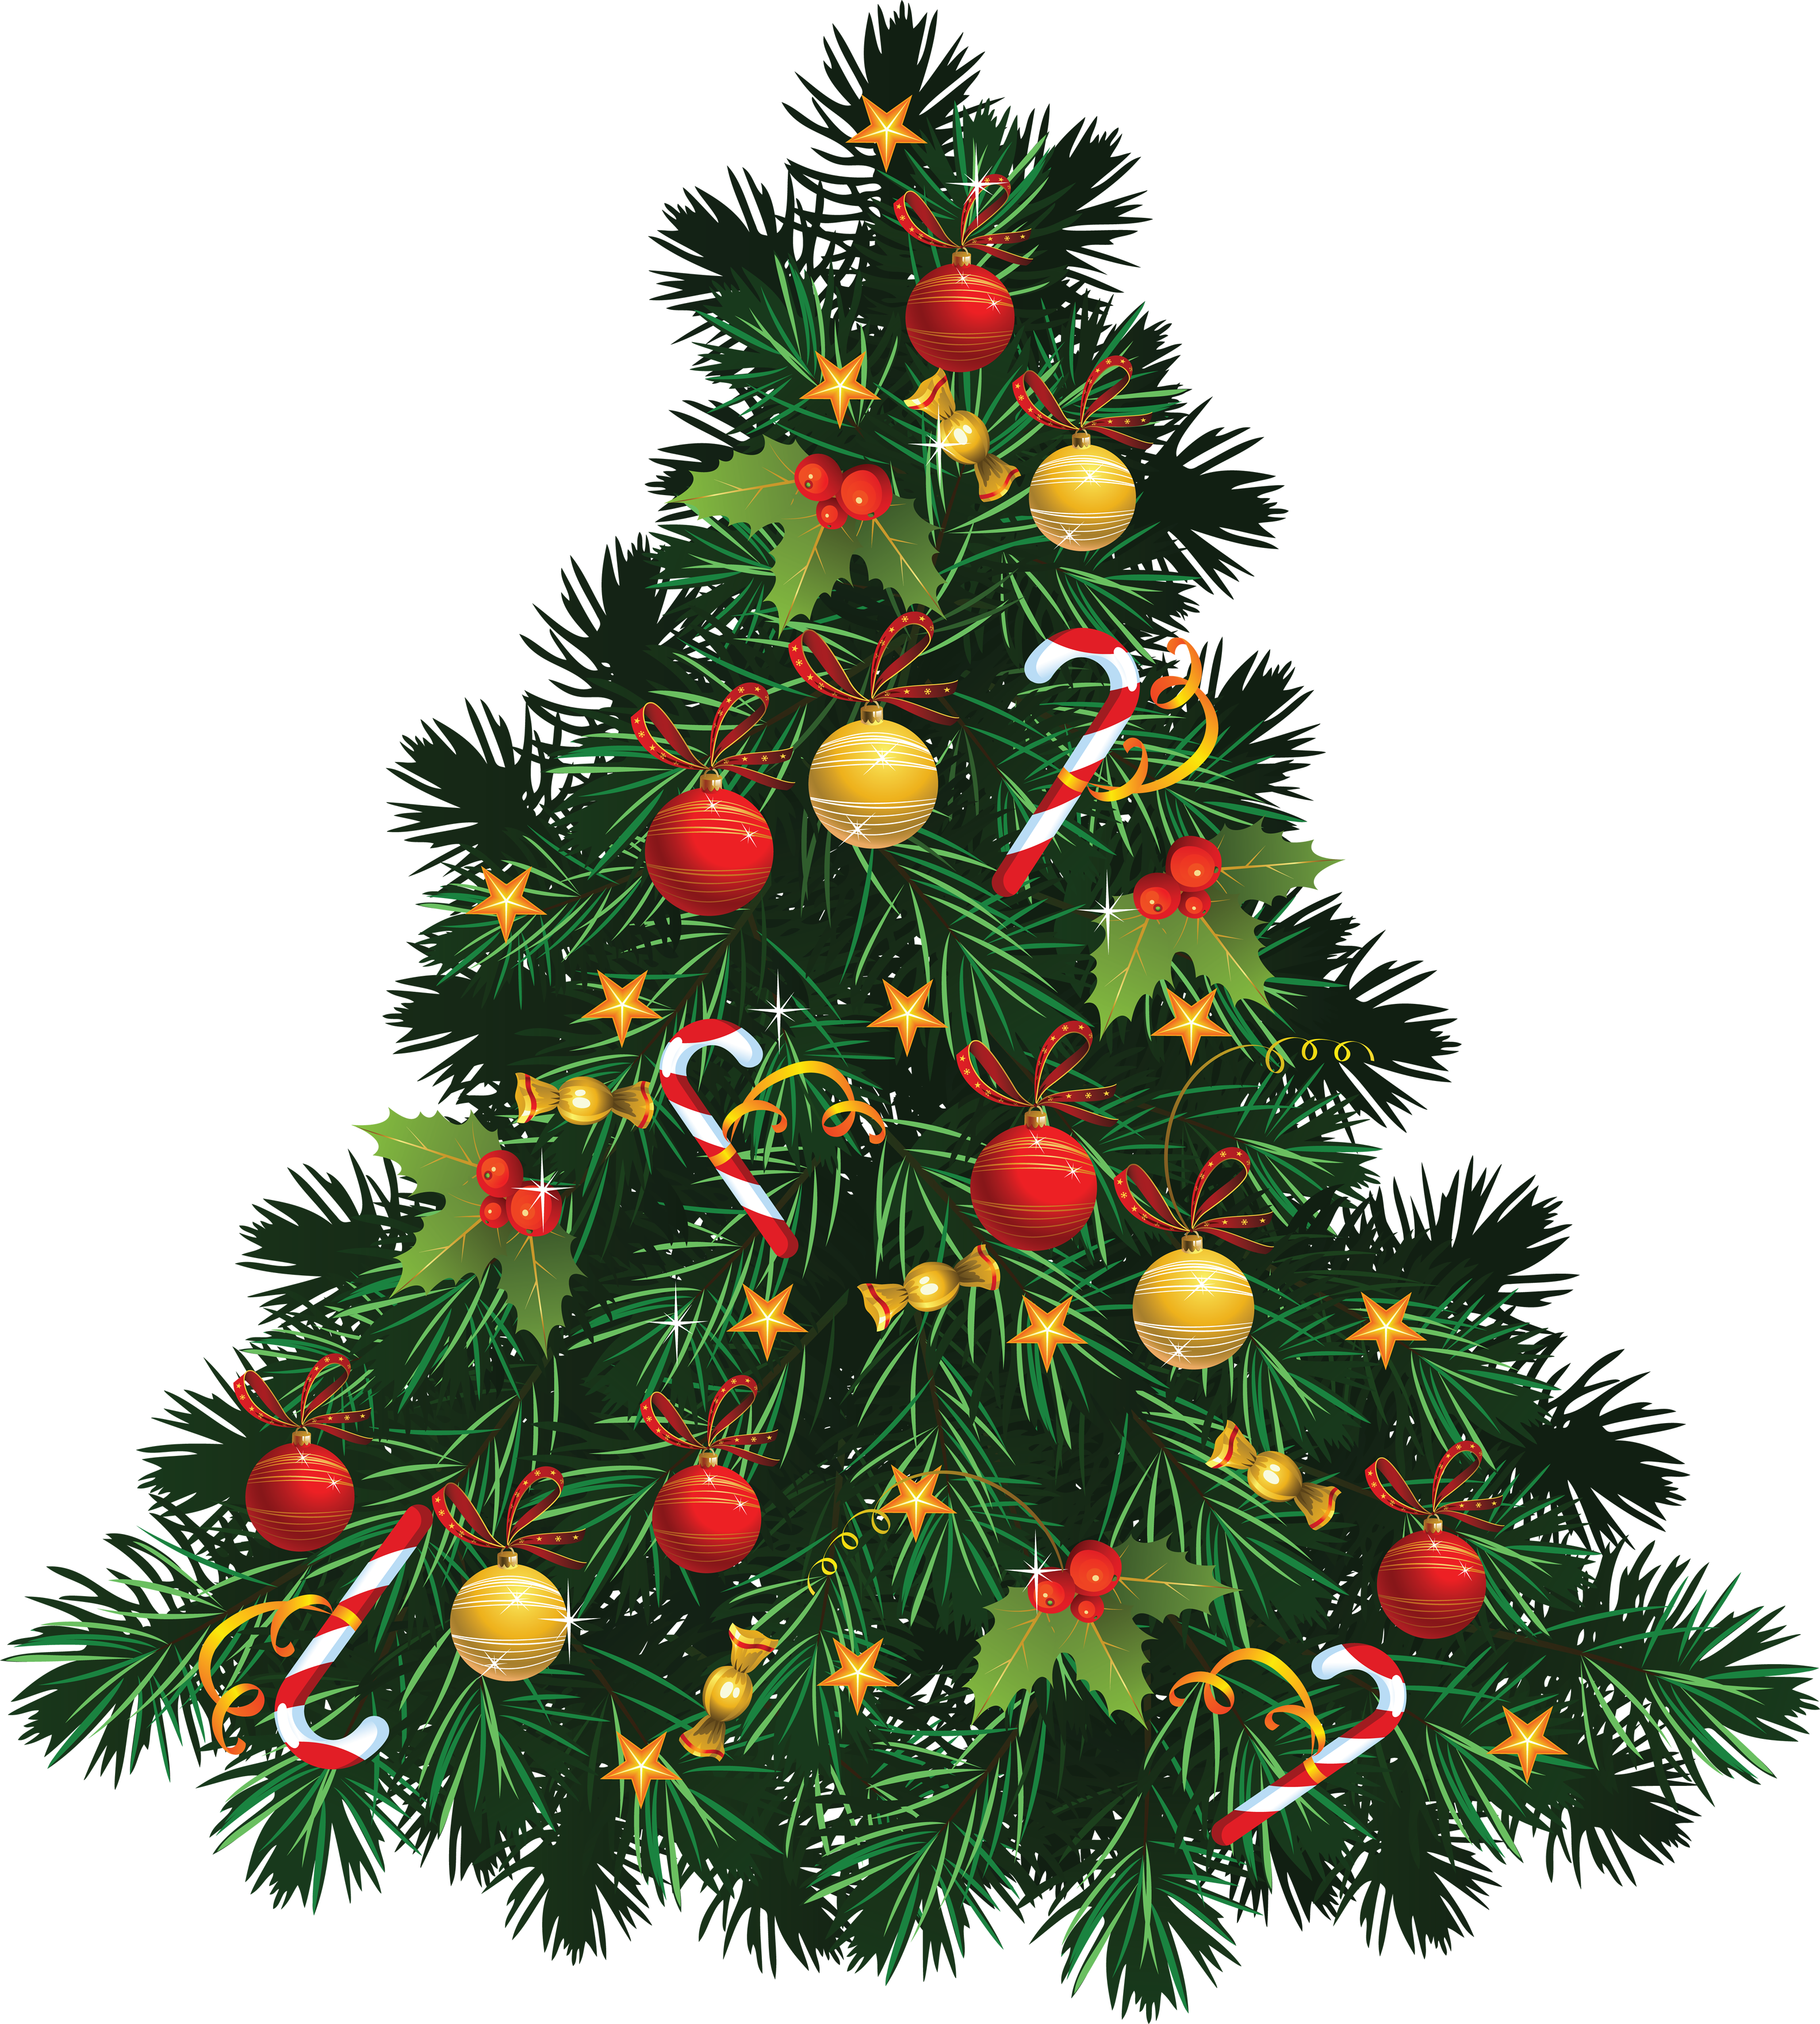 Christmas Tree Clipart PNG Image - PurePNG | Free transparent CC0 PNG